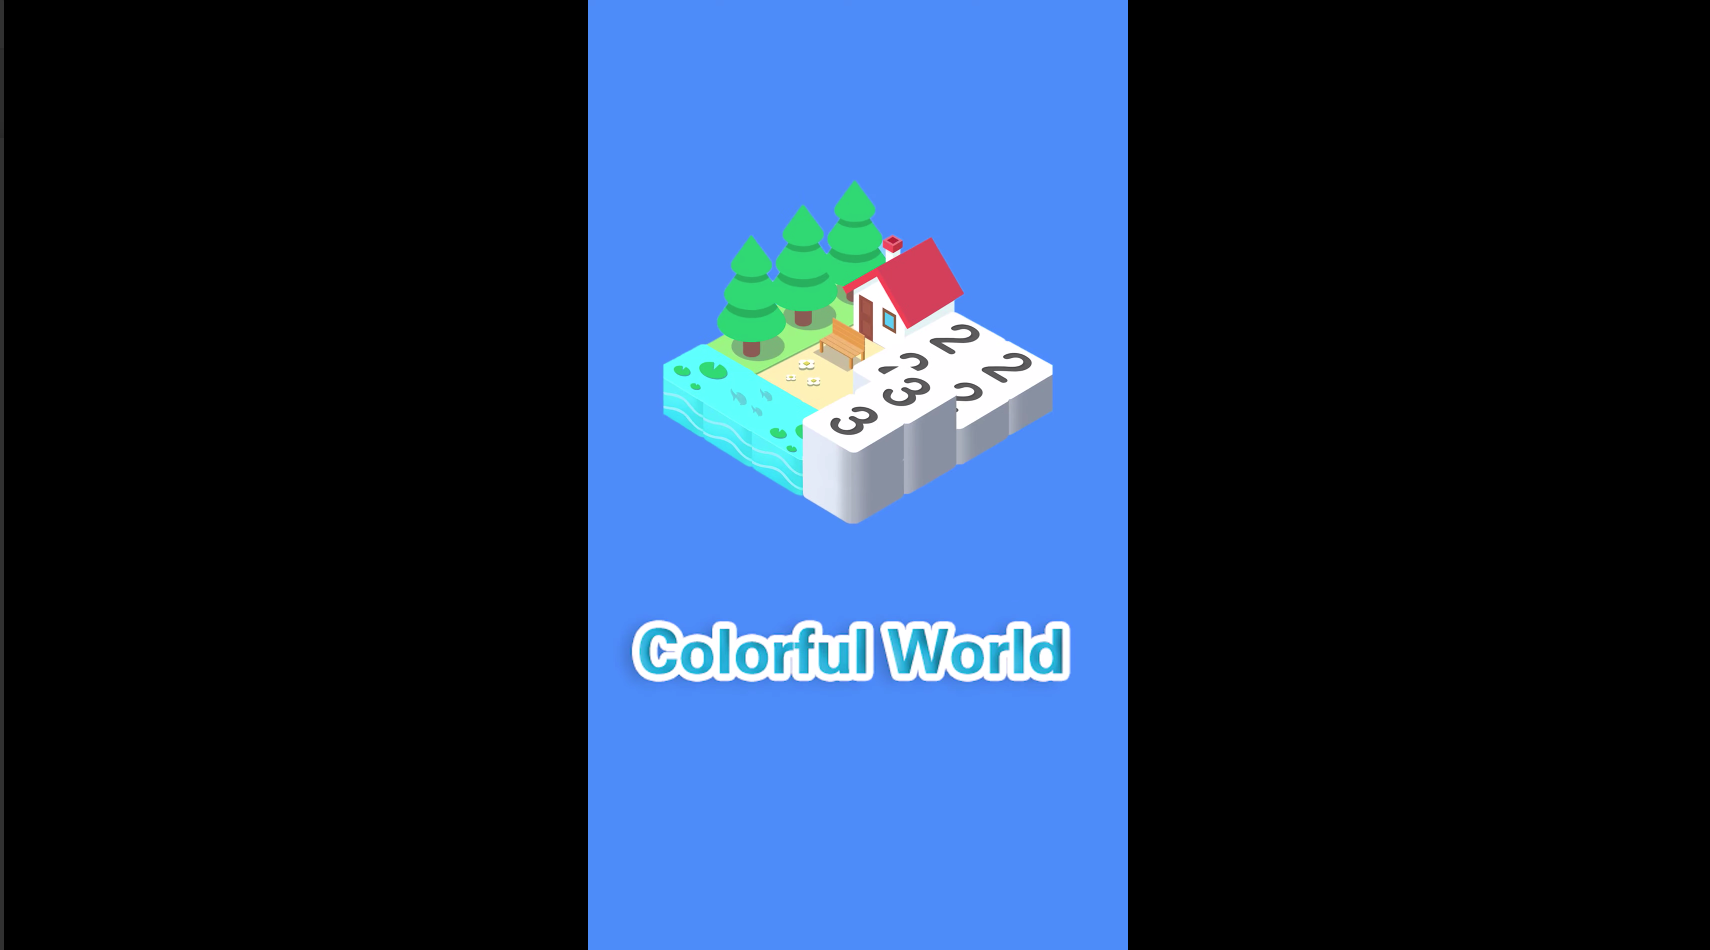 Screenshot of the video of Colorful World